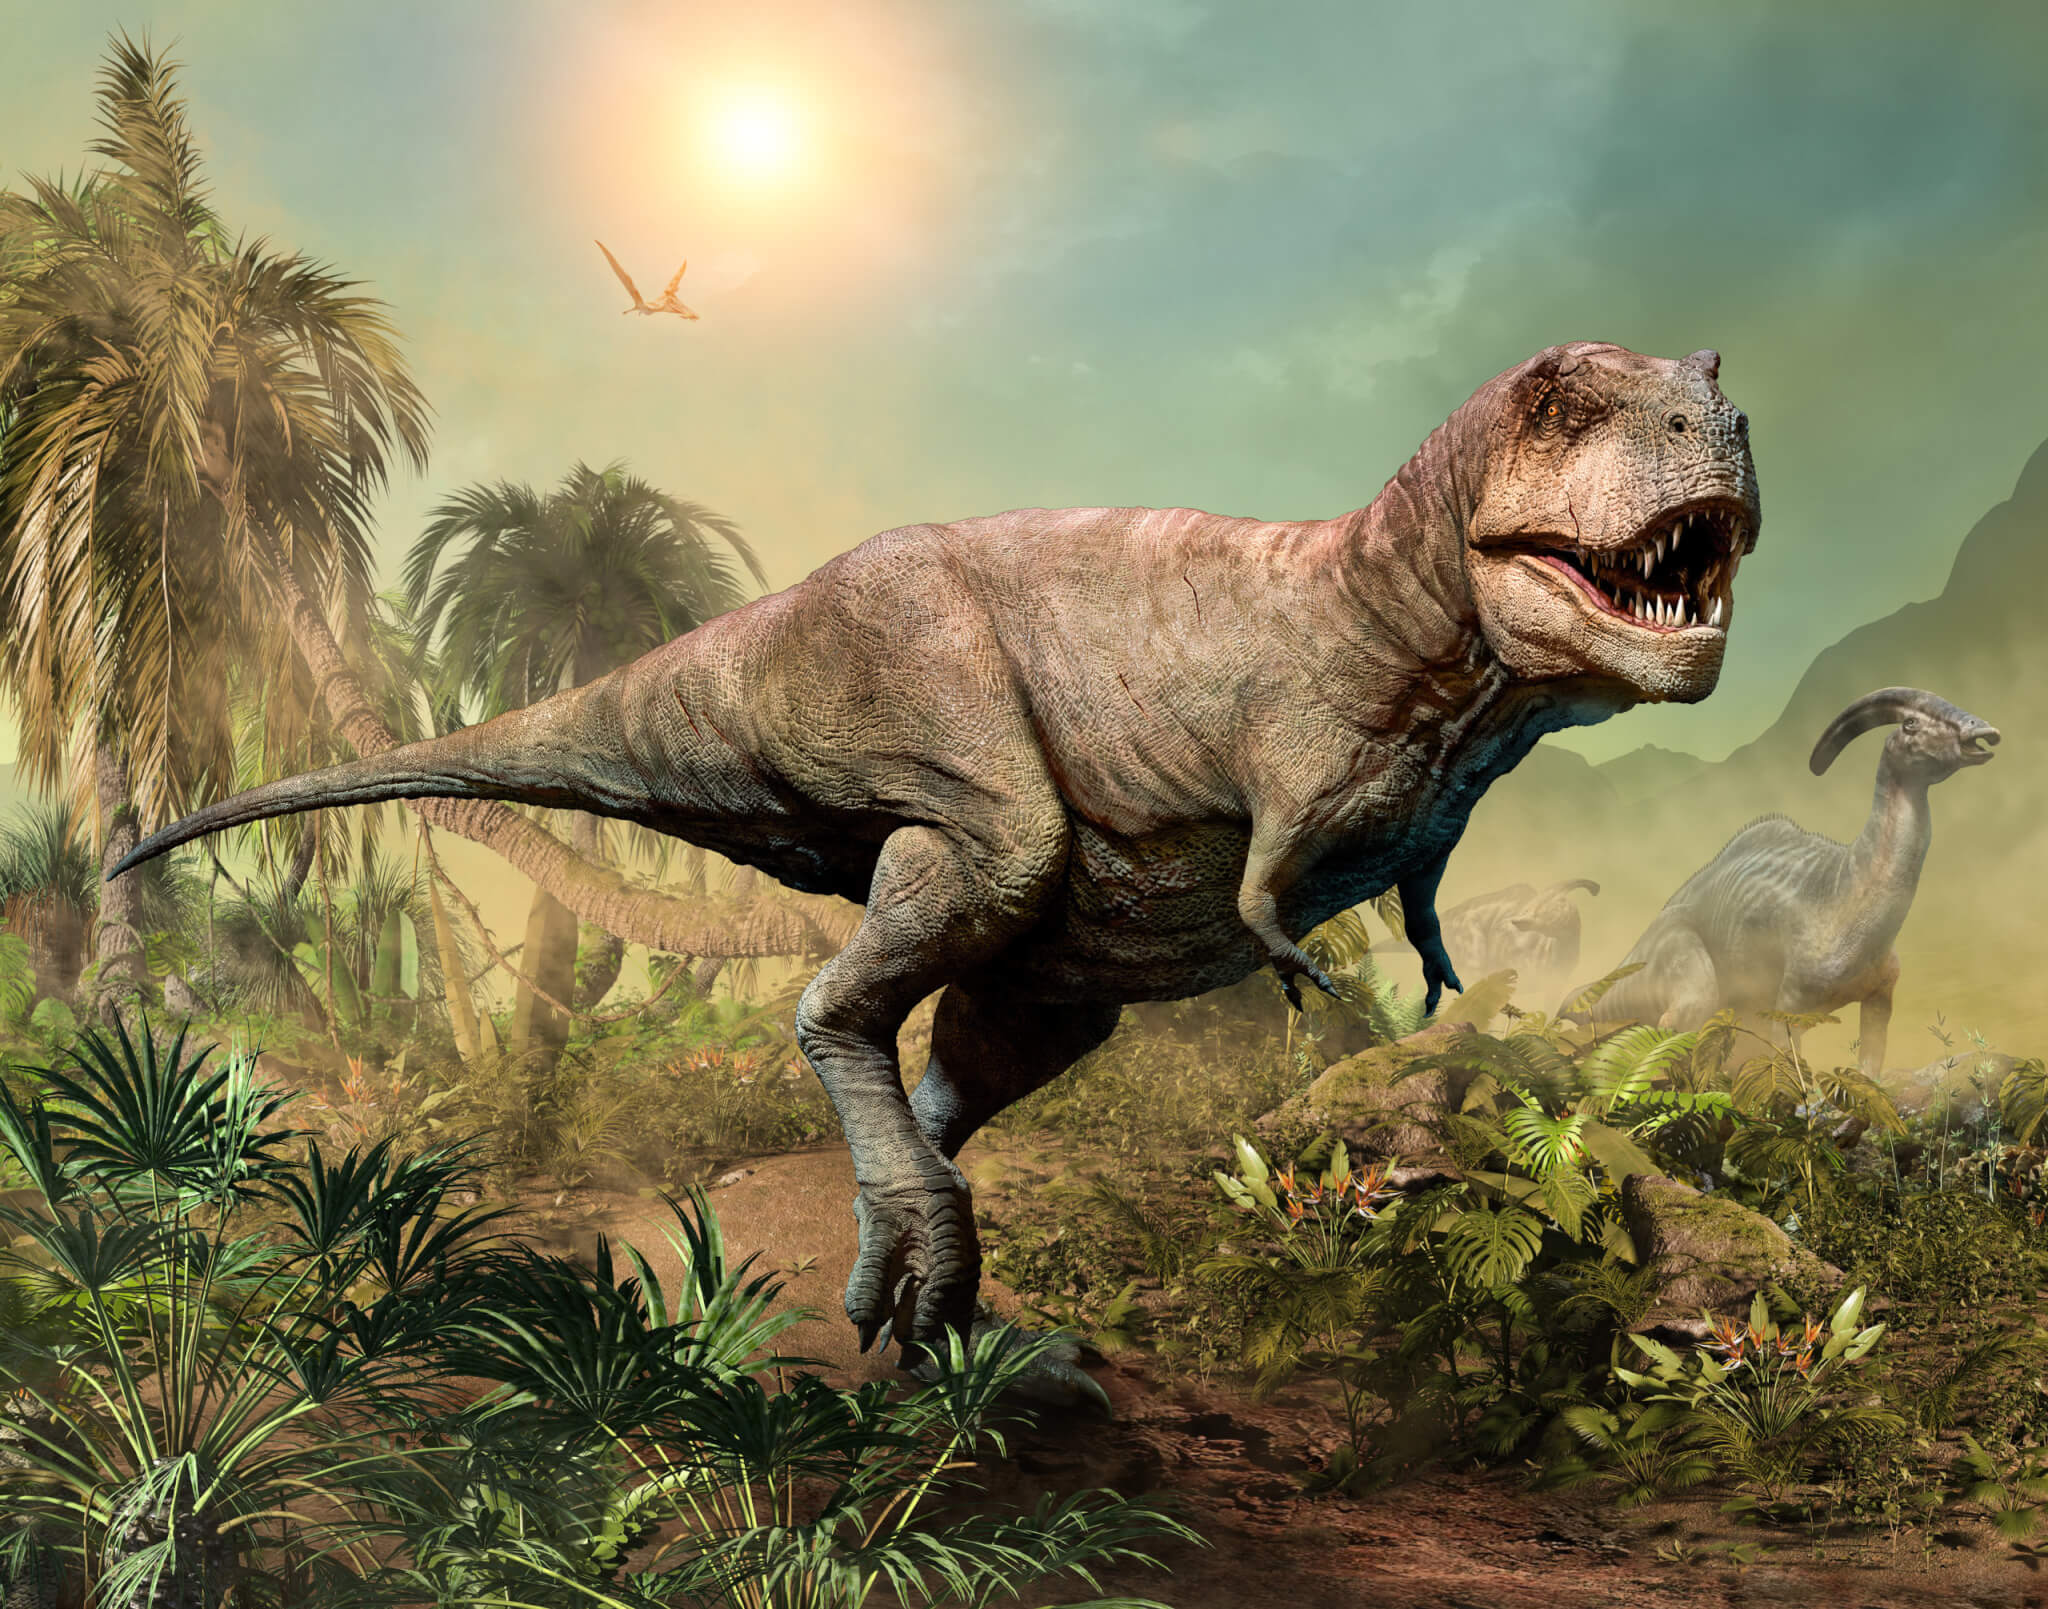 What do you know about T. rex?